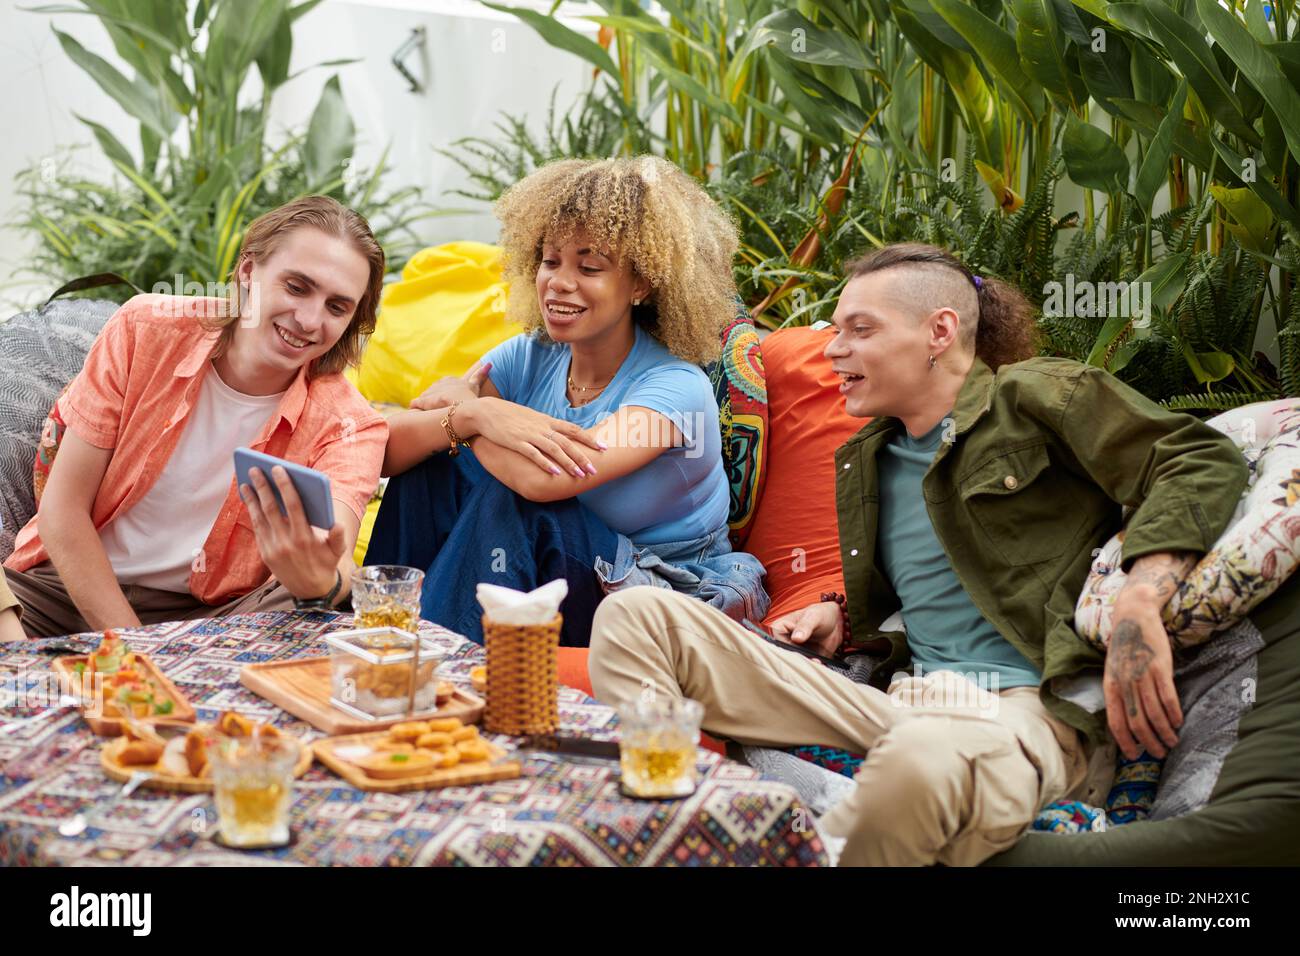 Cheerful young man showing funny video on smartphone to friends when they are hanging out together Stock Photo